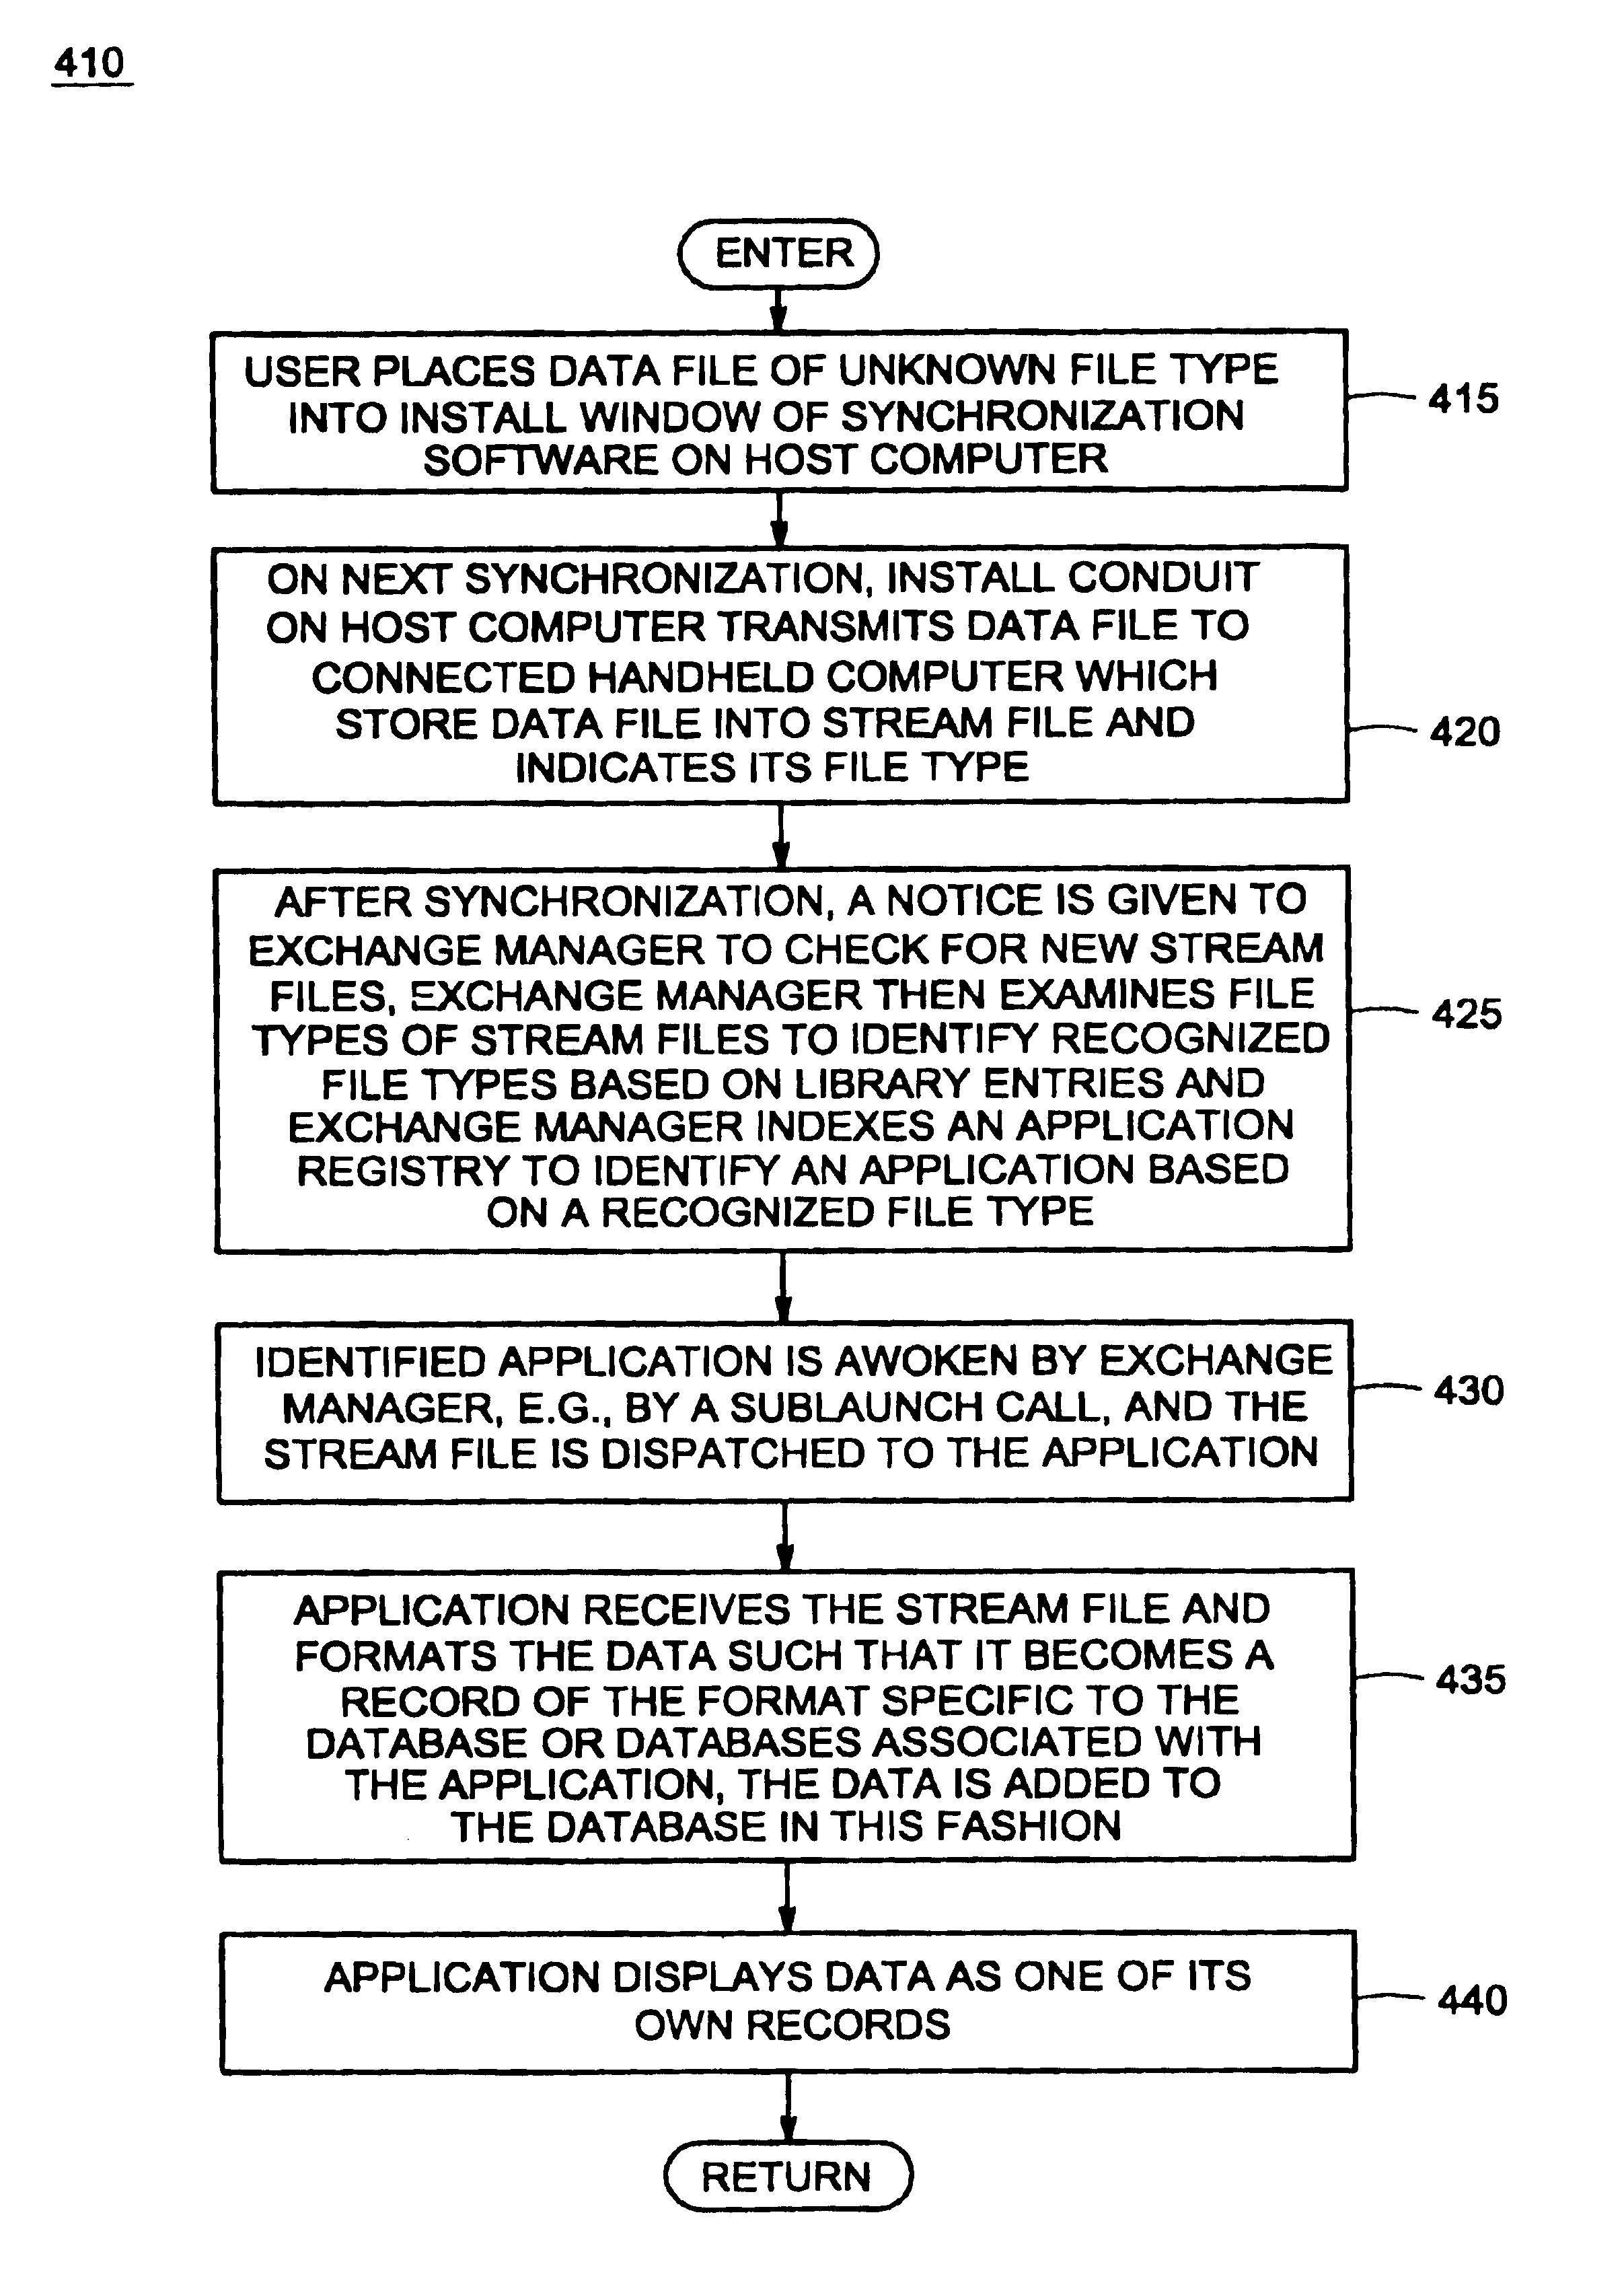 Data exchange between a handheld device and another computer system using an exchange manager via synchronization